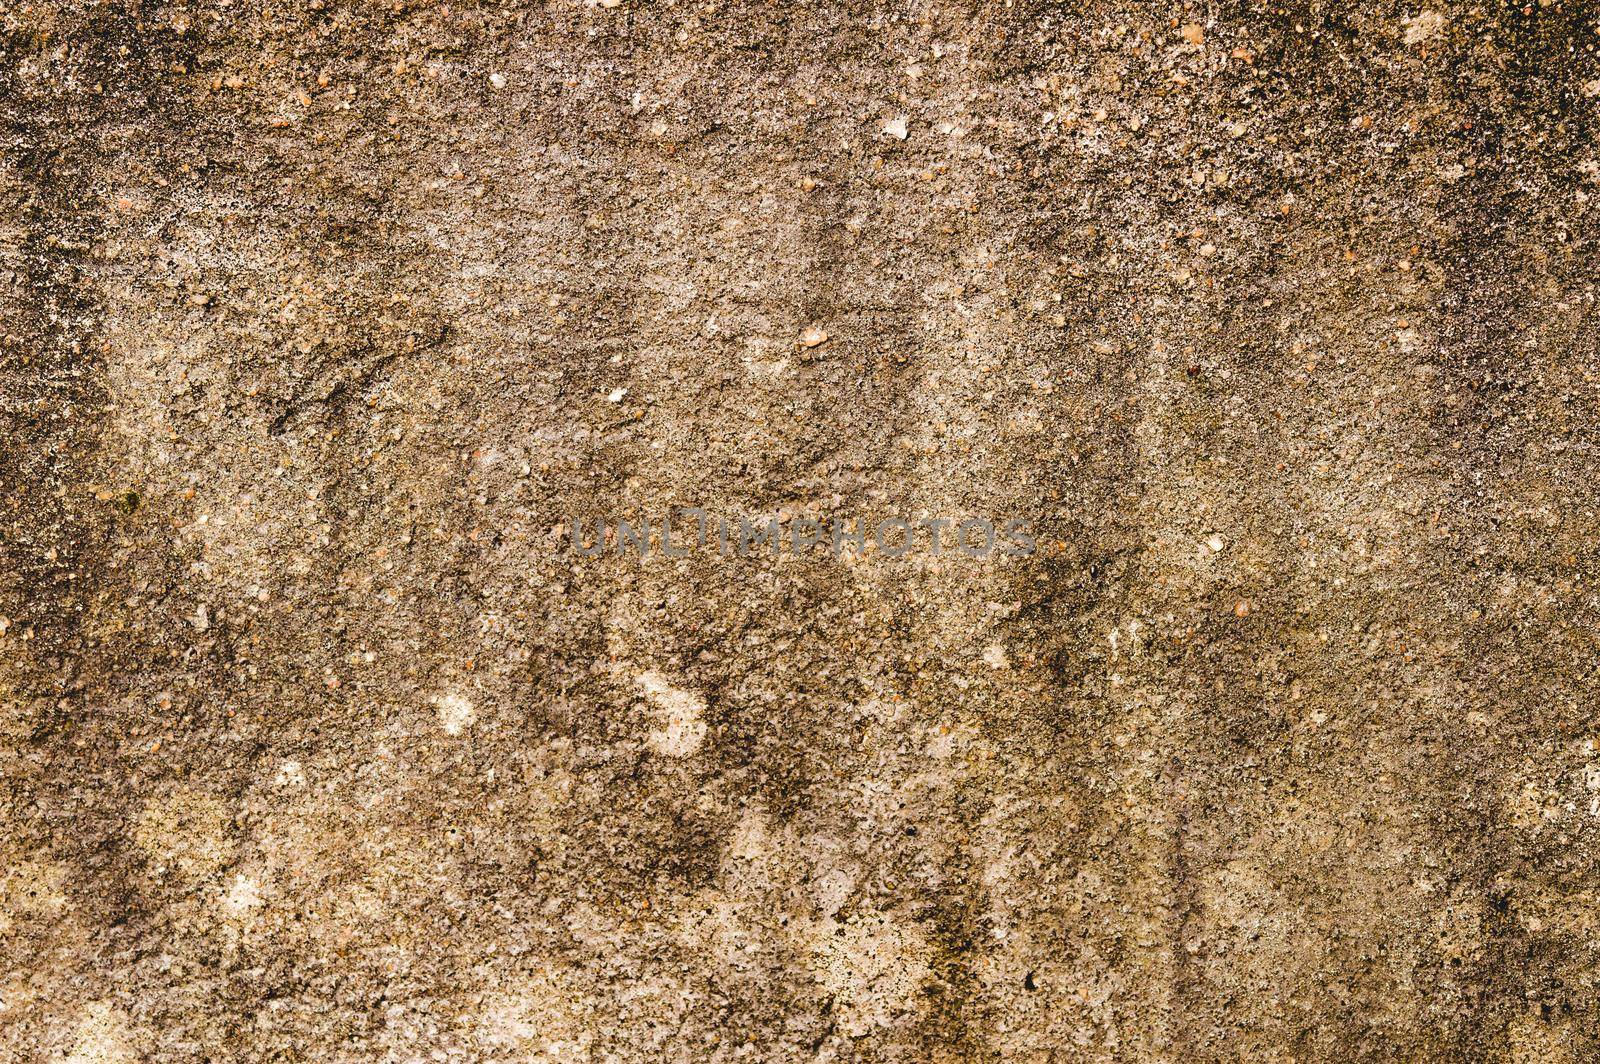 Close up Sand Wall Texture Pattern Background design element. Sandy effects on sandstone plaster pillar with minor cracks and uneven patches and highlighting Natural brown color shade. Copy Space